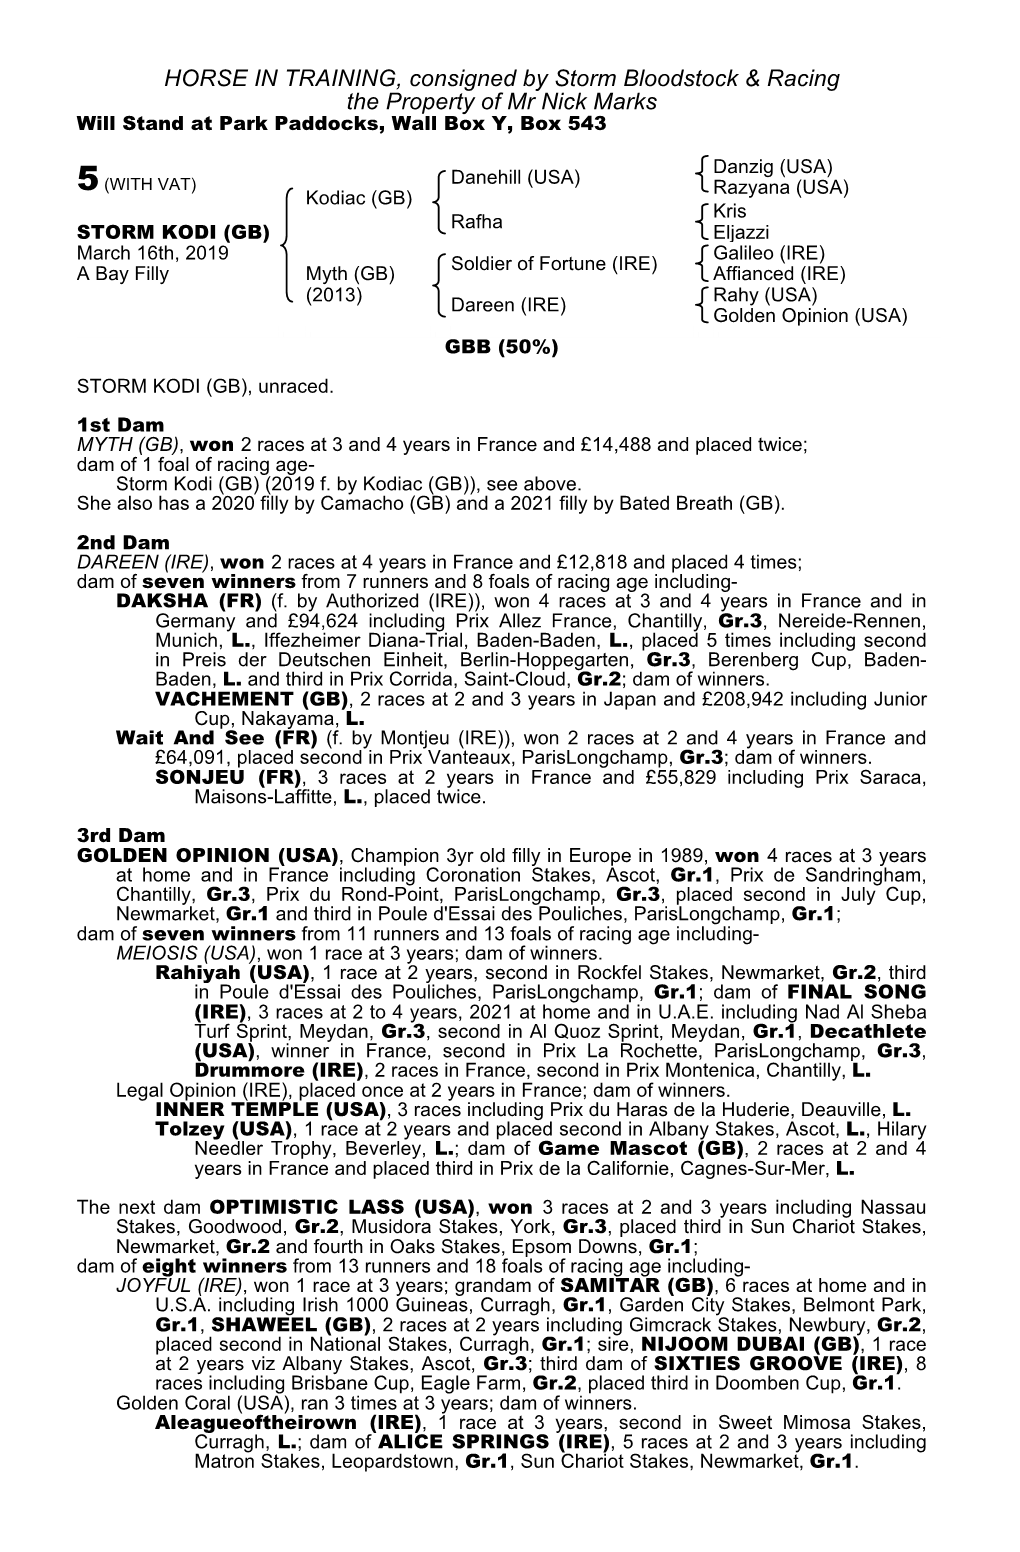 HORSE in TRAINING, Consigned by Storm Bloodstock & Racing The